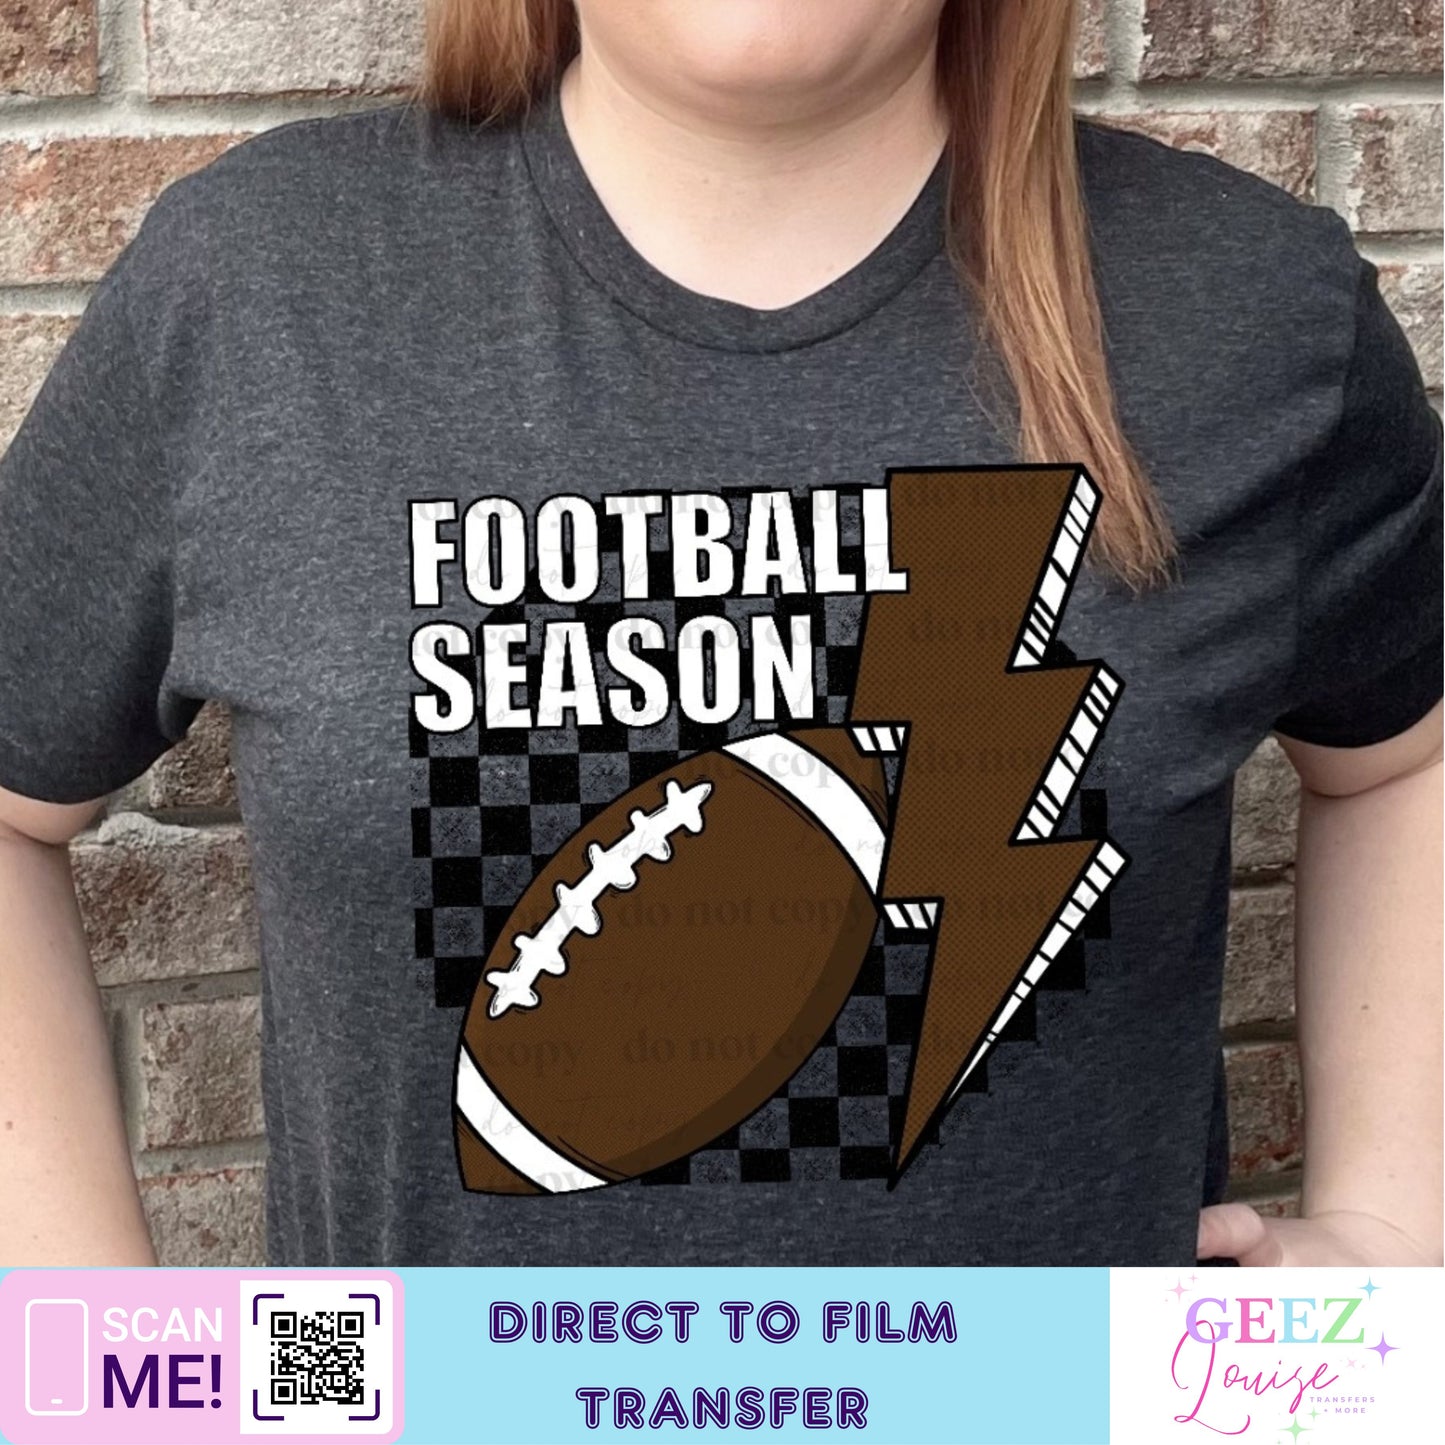 Football season - Direct to Film Transfer - made to order